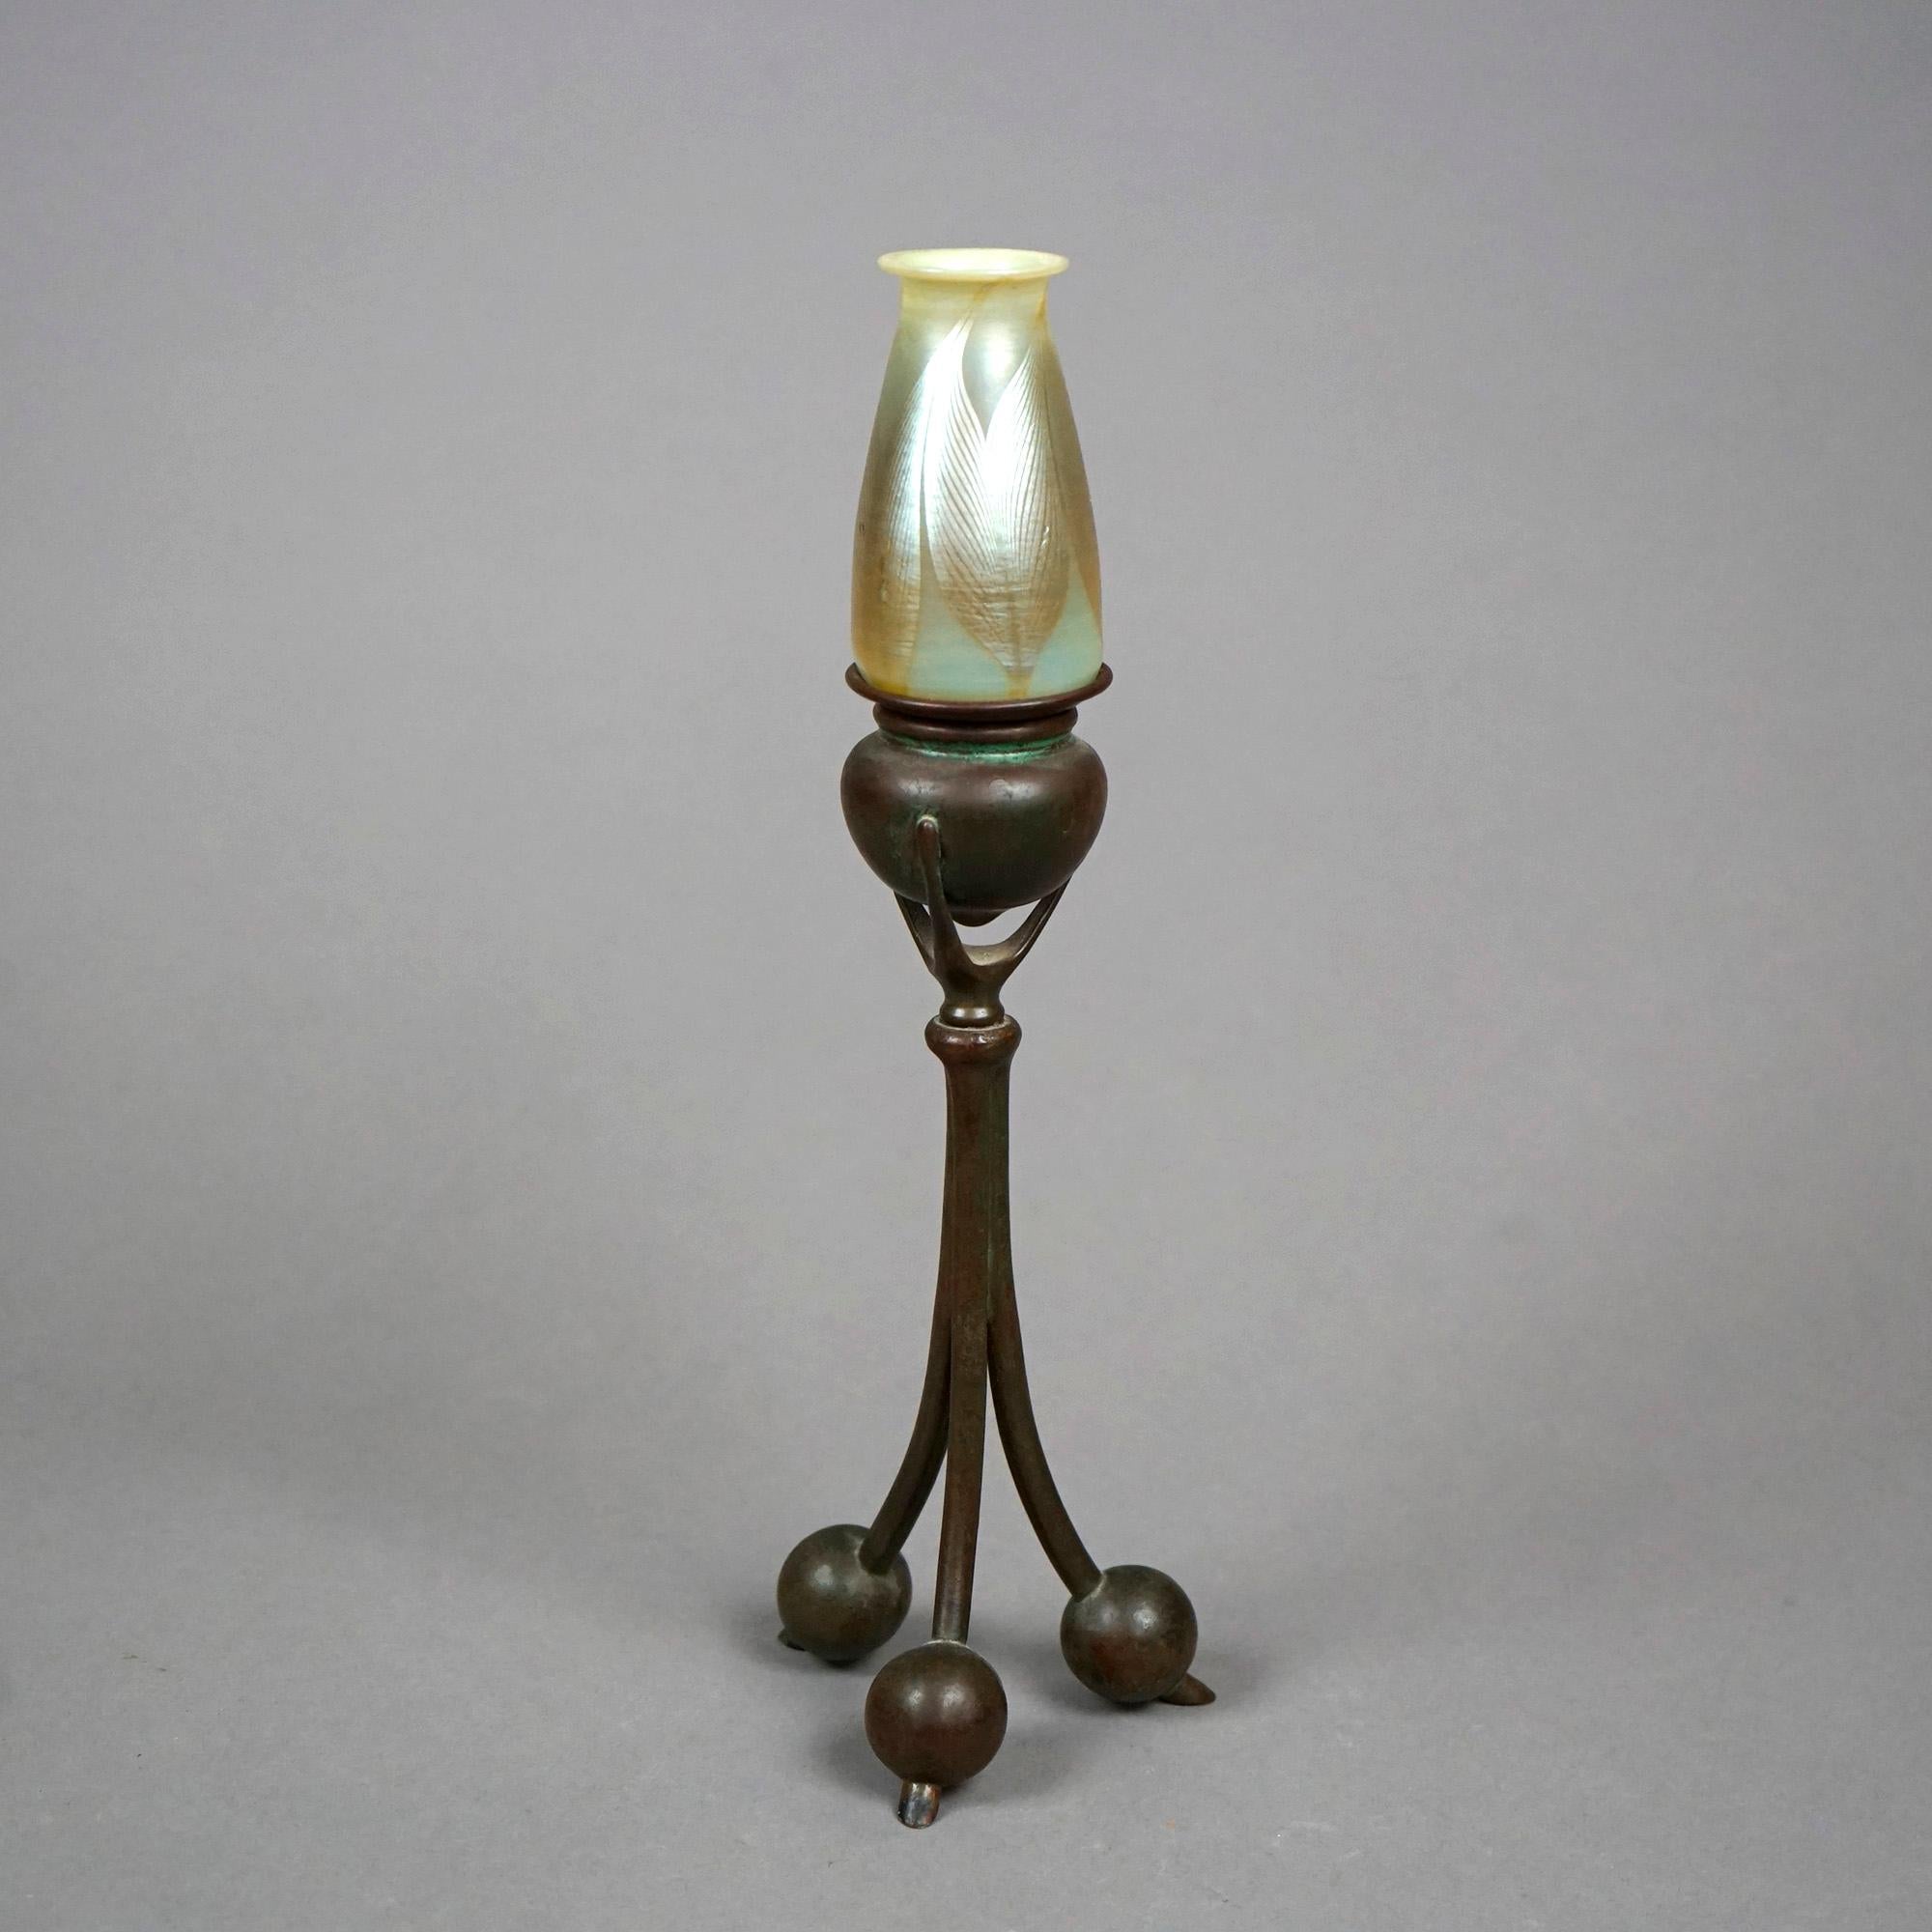 An Arts and Crafts candlestick by Tiffany Studios offers pulled feather art glass shade over cast bronze tripod base, signed on foot as photographed, c1910

Measures- 12.25'' H x 3.5'' W x 3.5'' D.